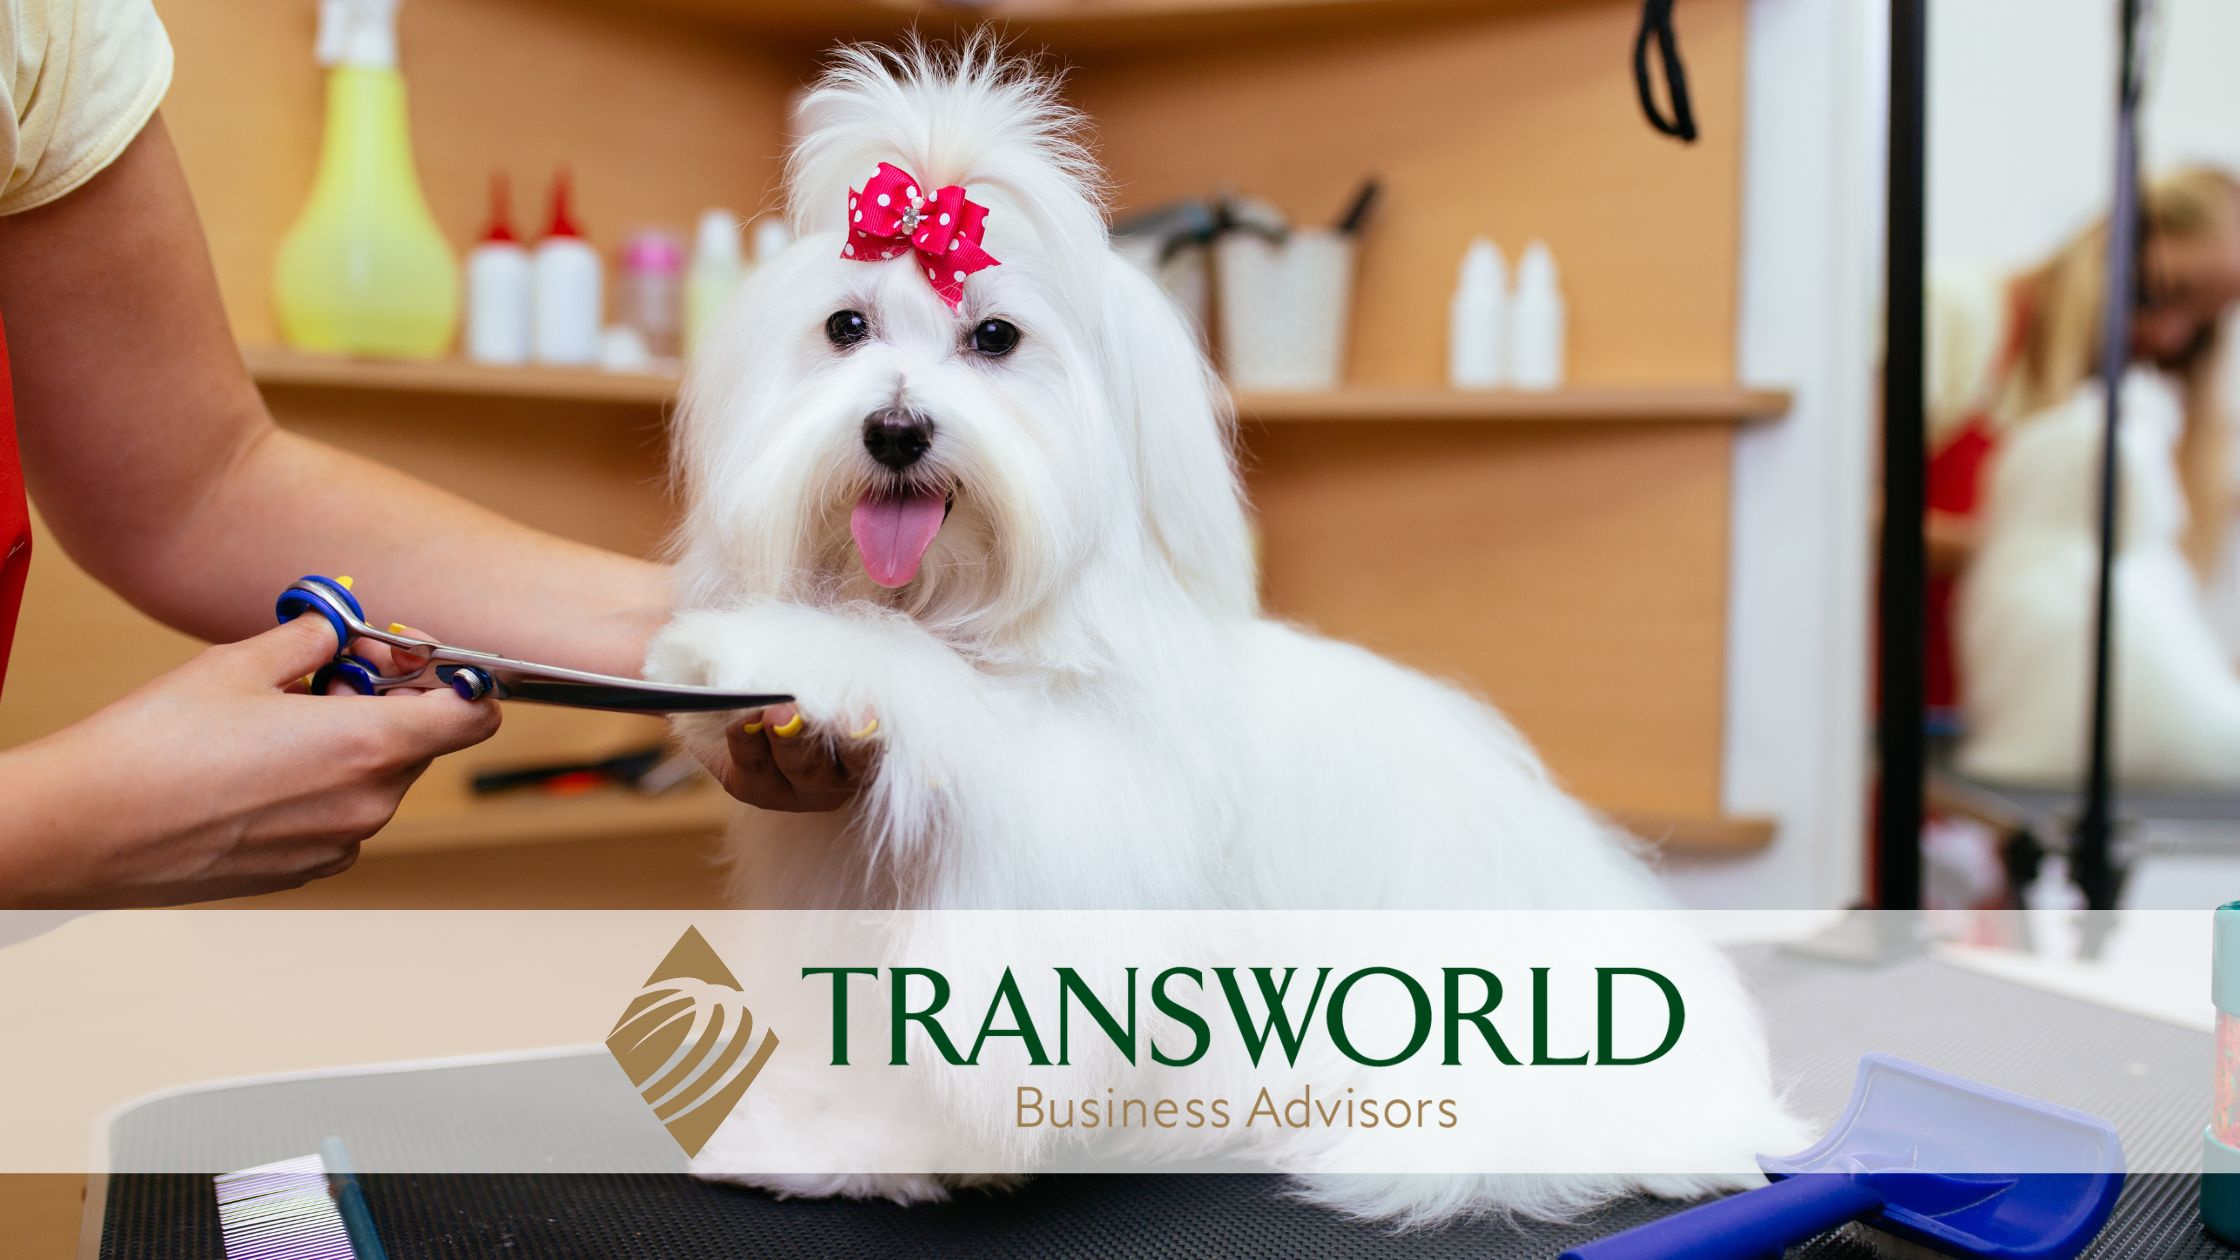 Quality Pet Care Grooming Business in Katy